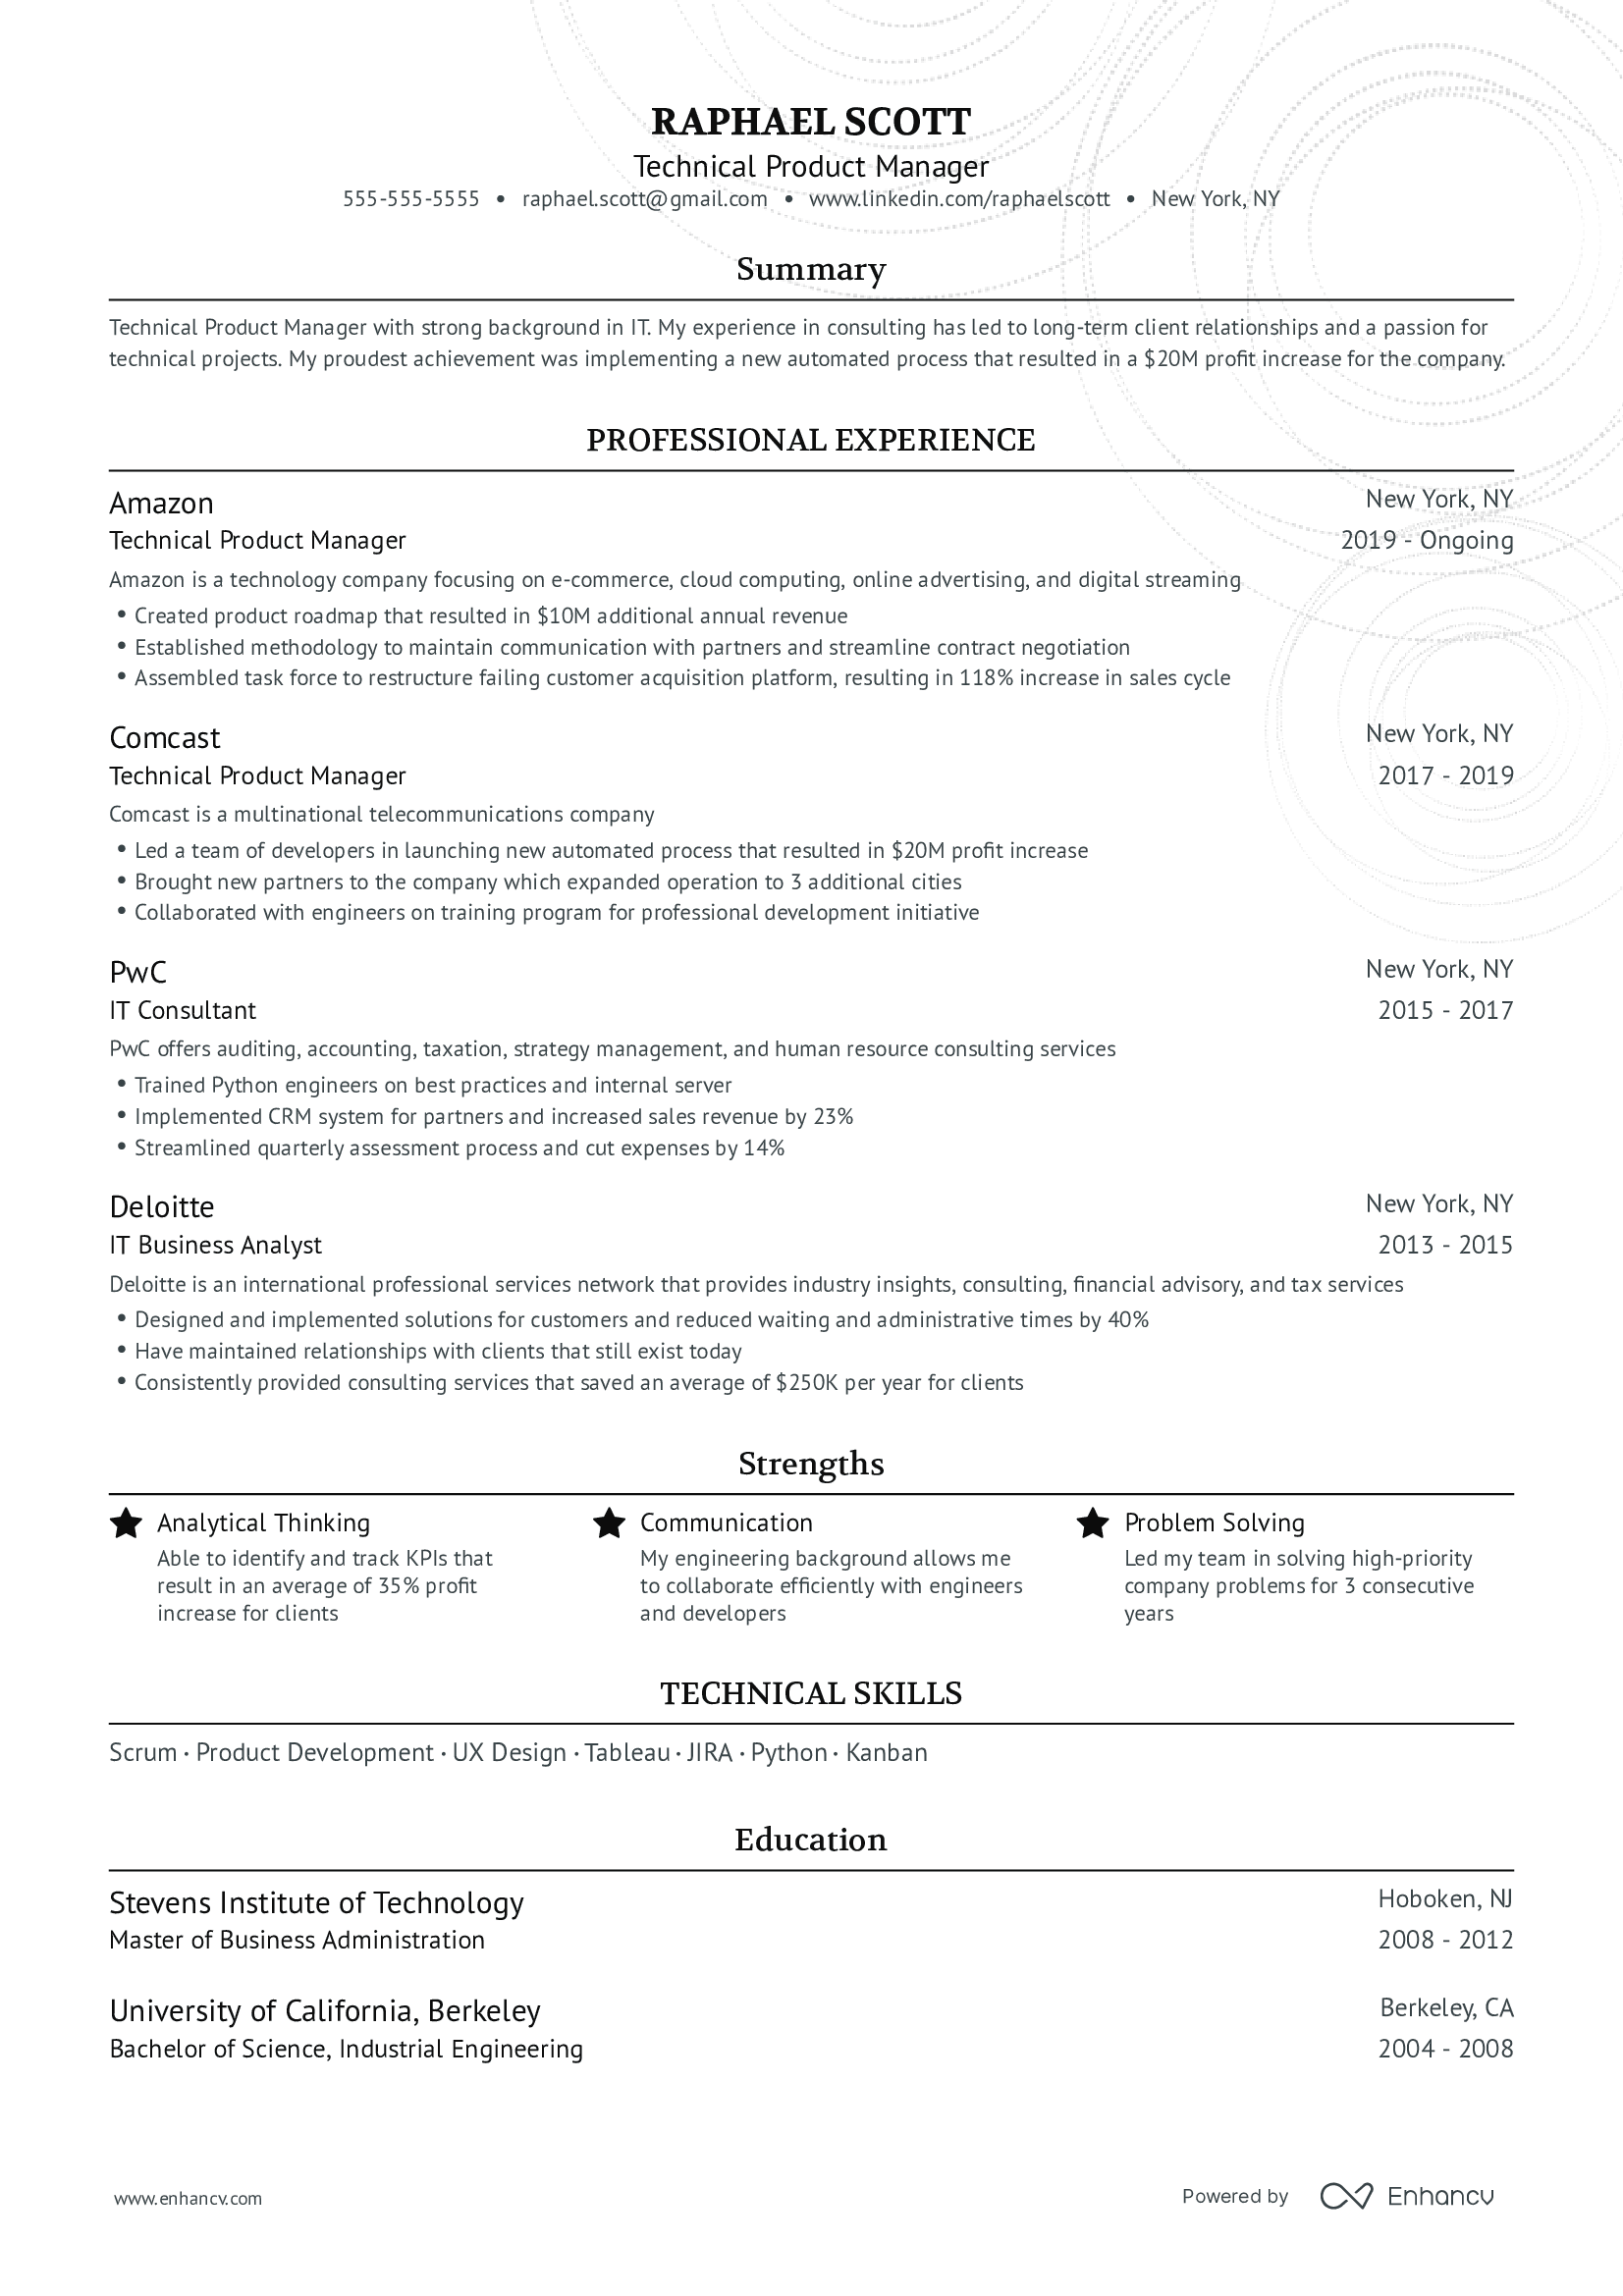 Techincal Product Manager Resume.png